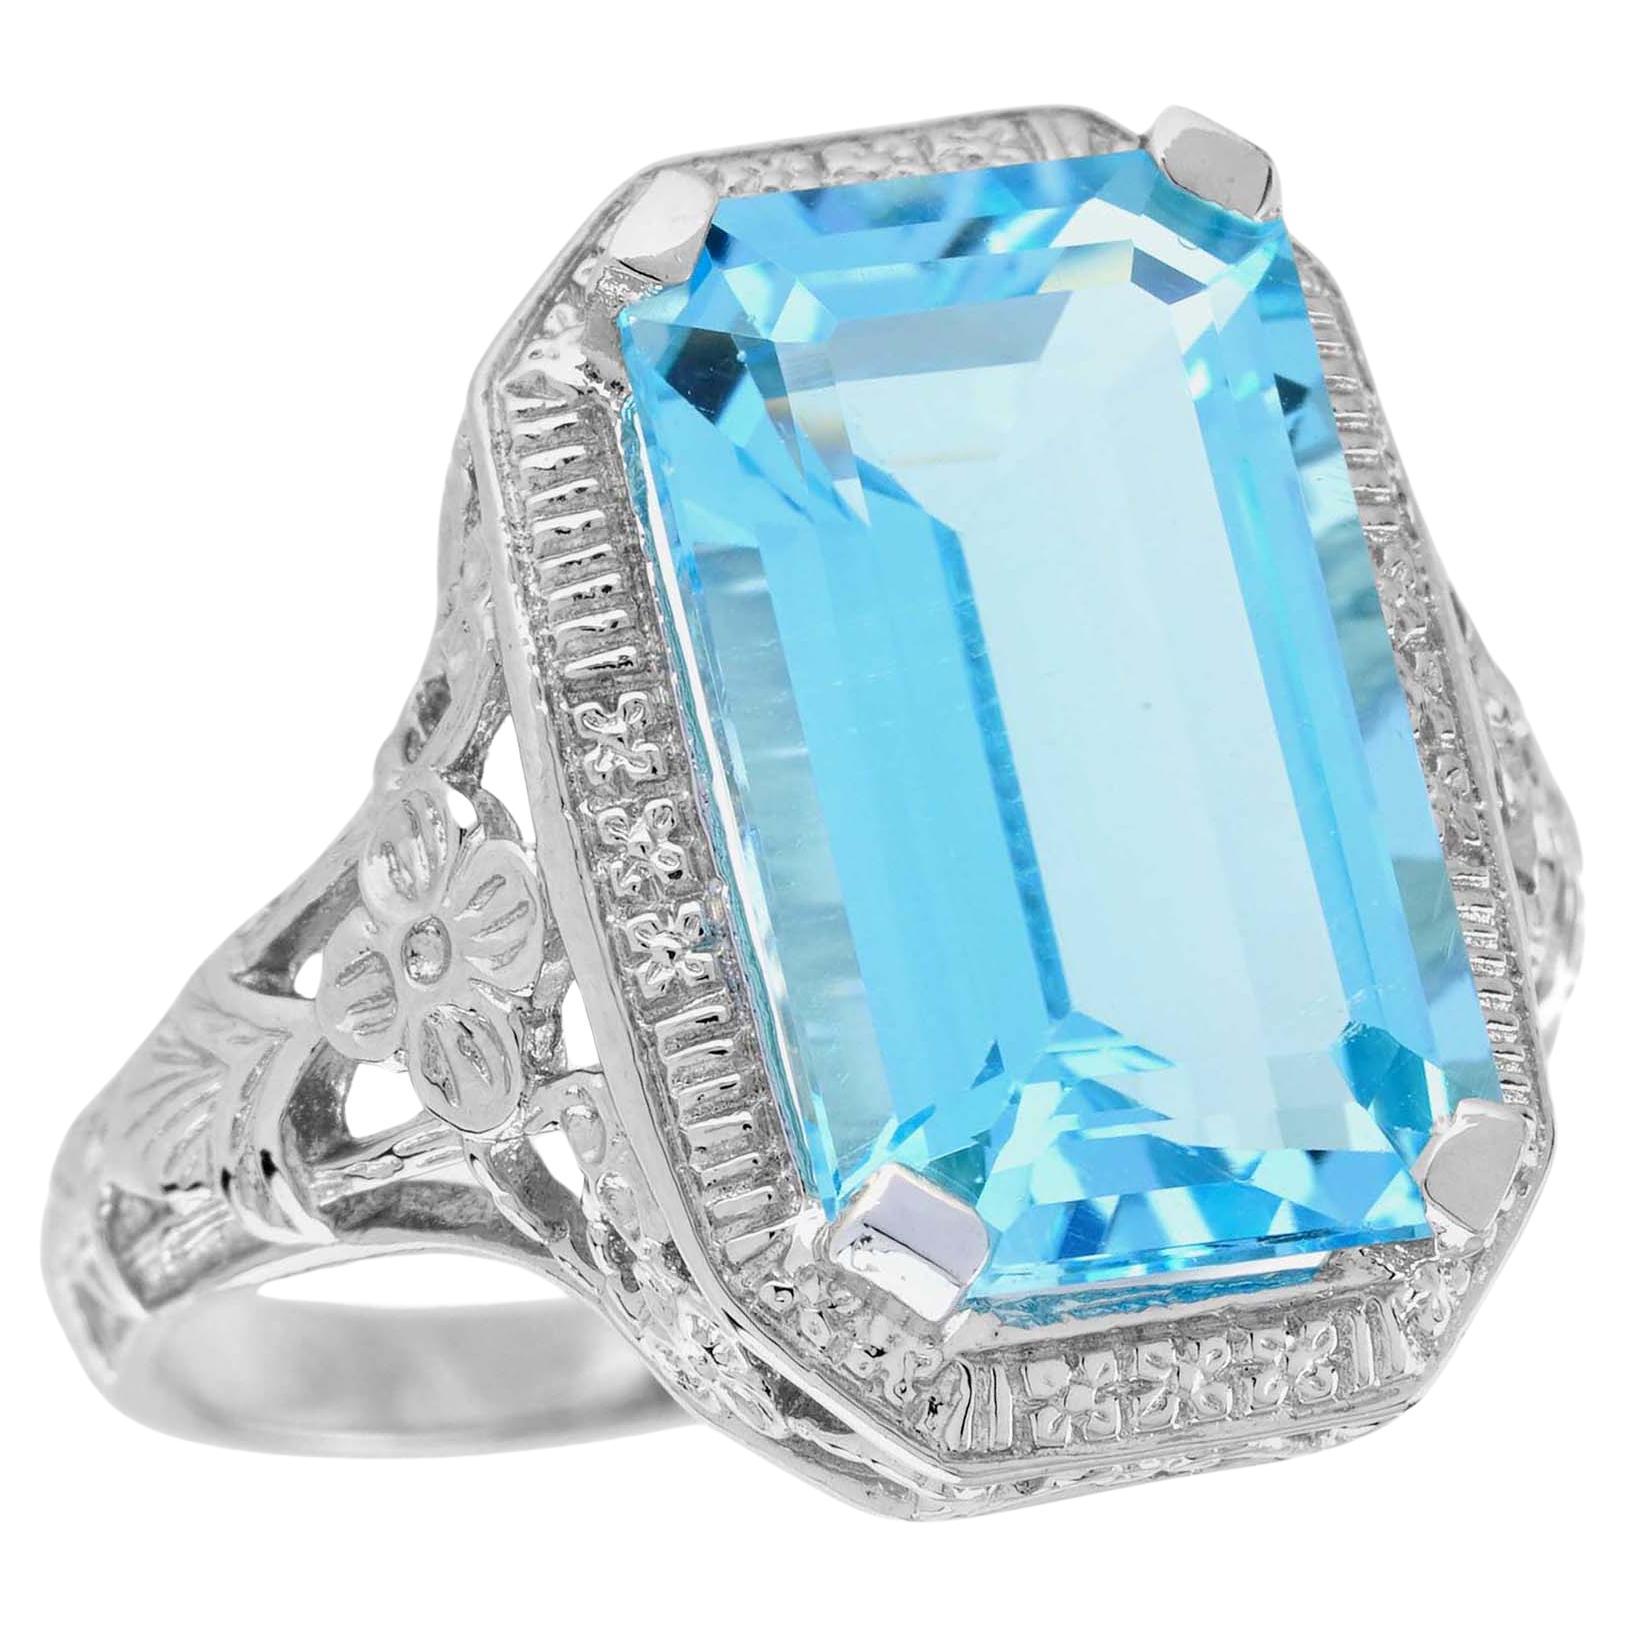 For Sale:  10 Ct. Natural Blue Topaz Vintage Style Cocktail Ring in Solid 9K White Gold